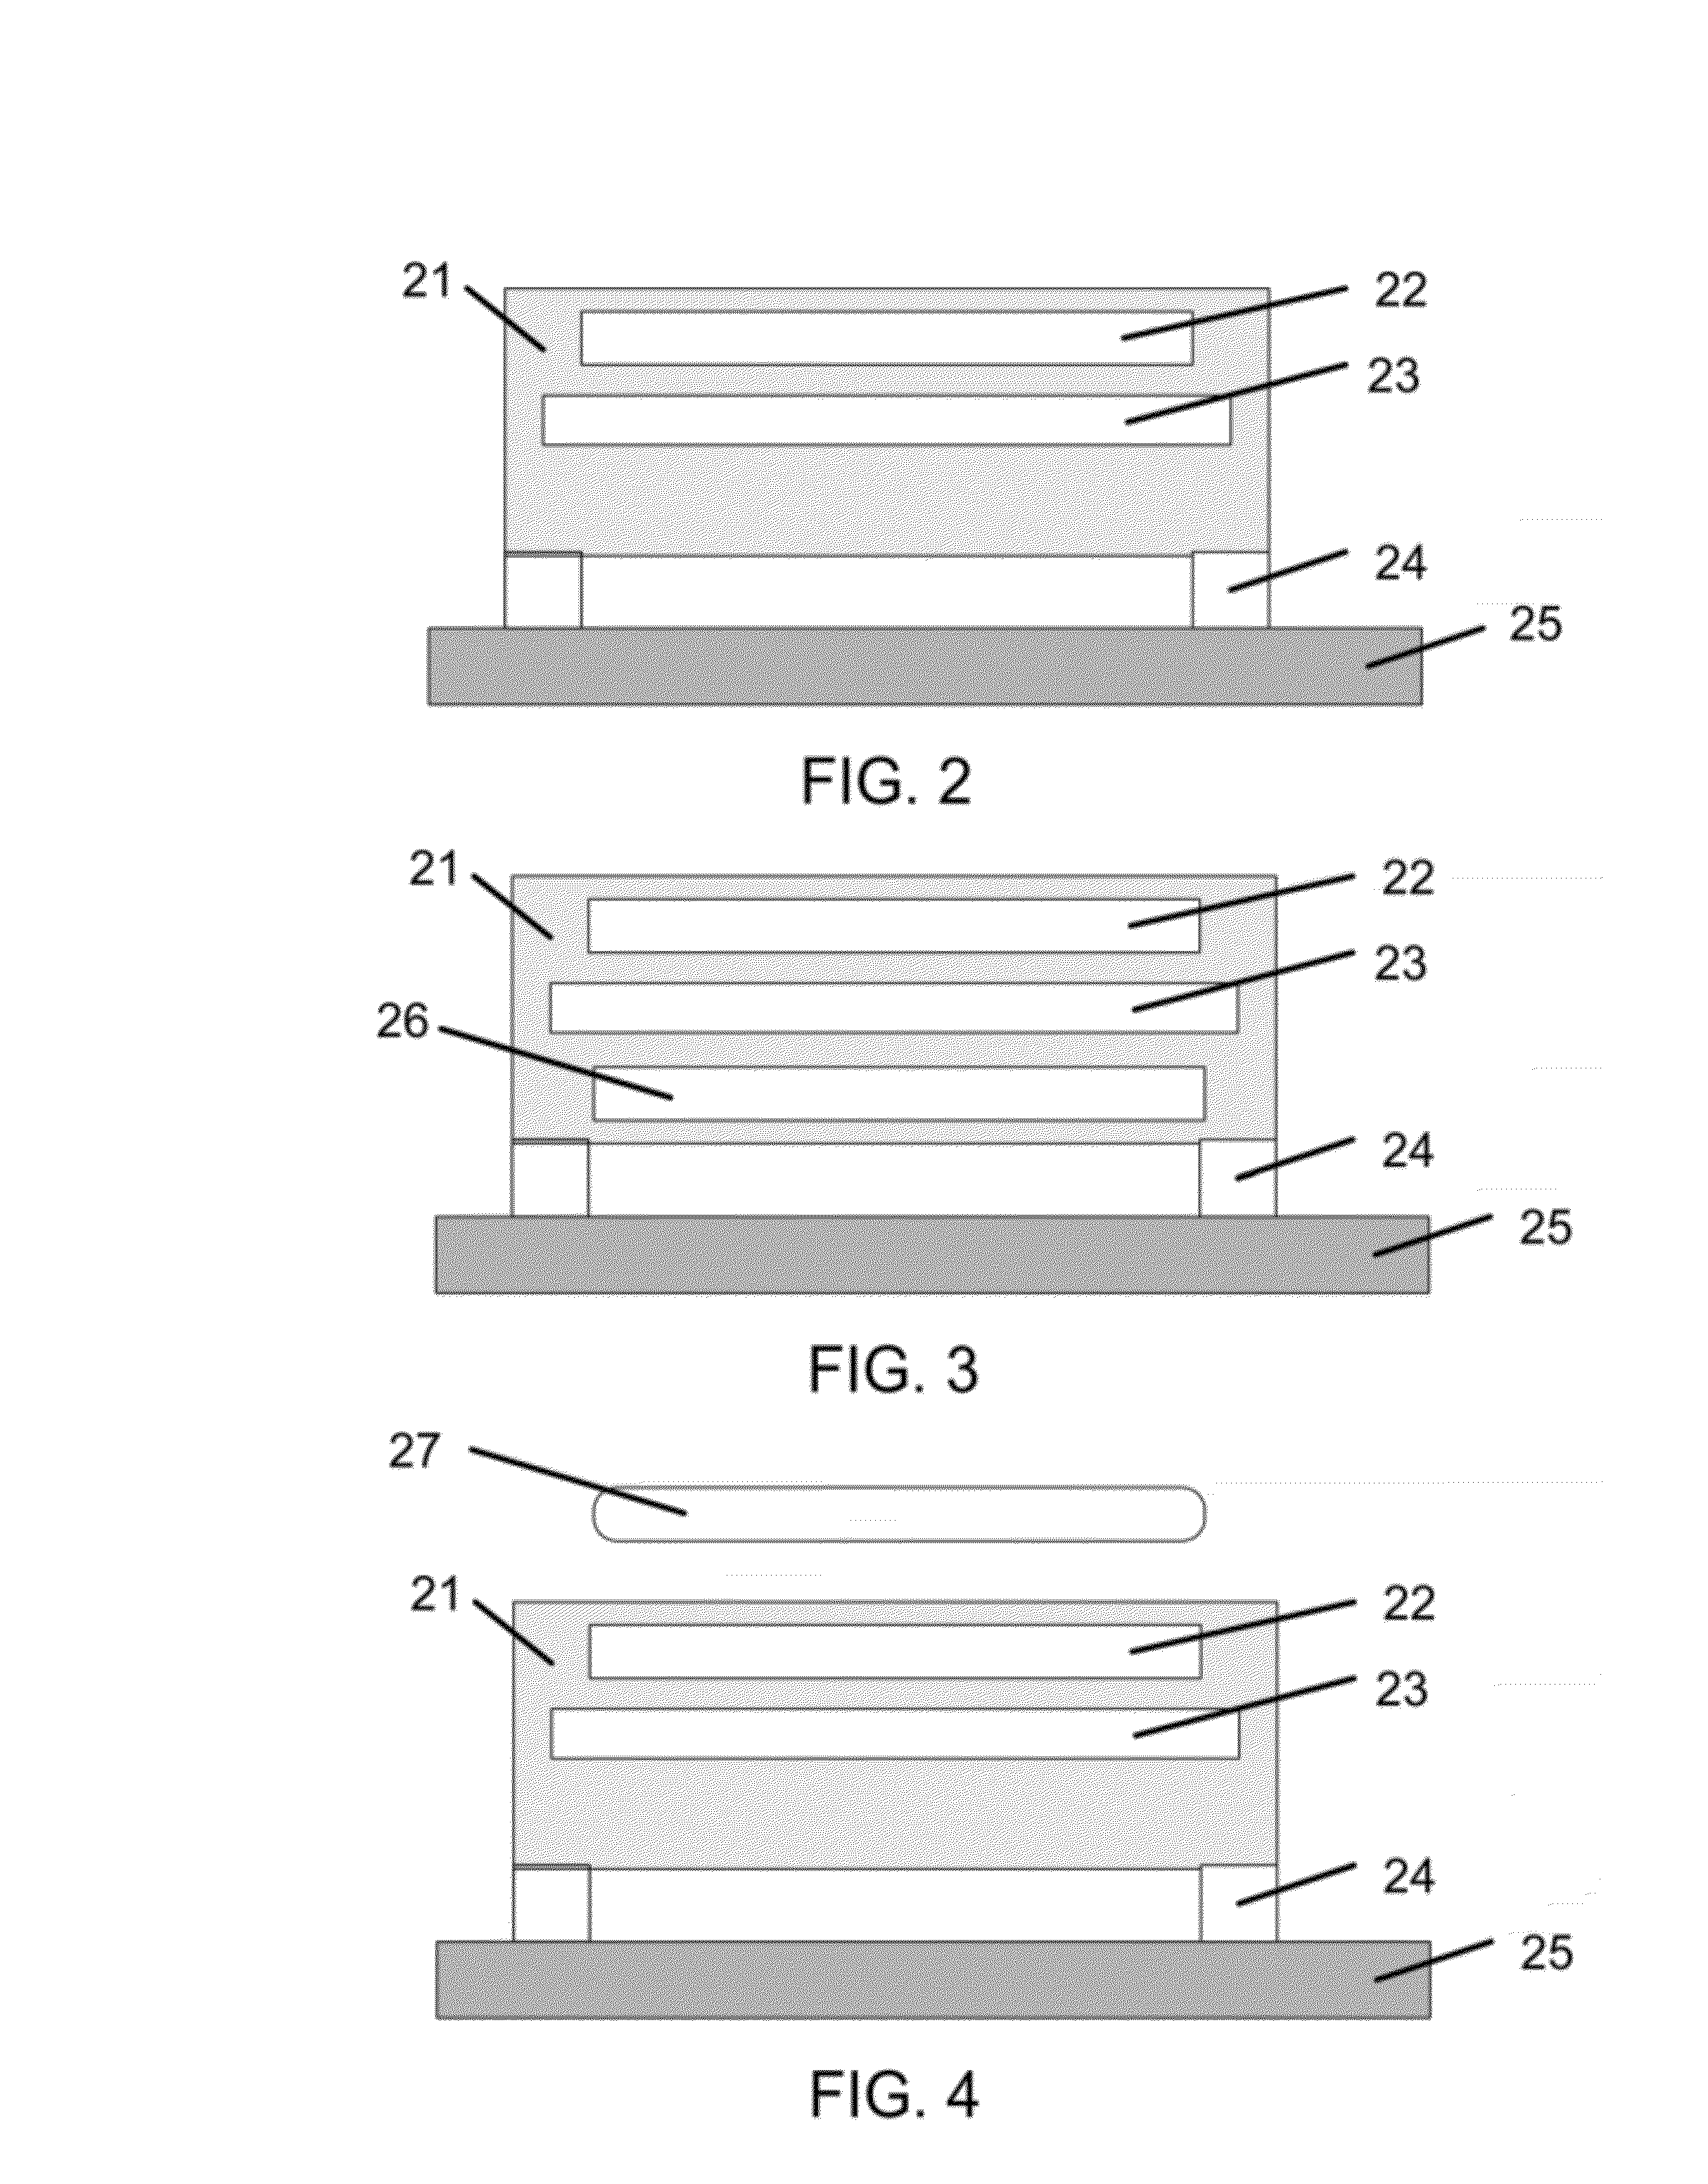 Destruction of data stored in phase change memory